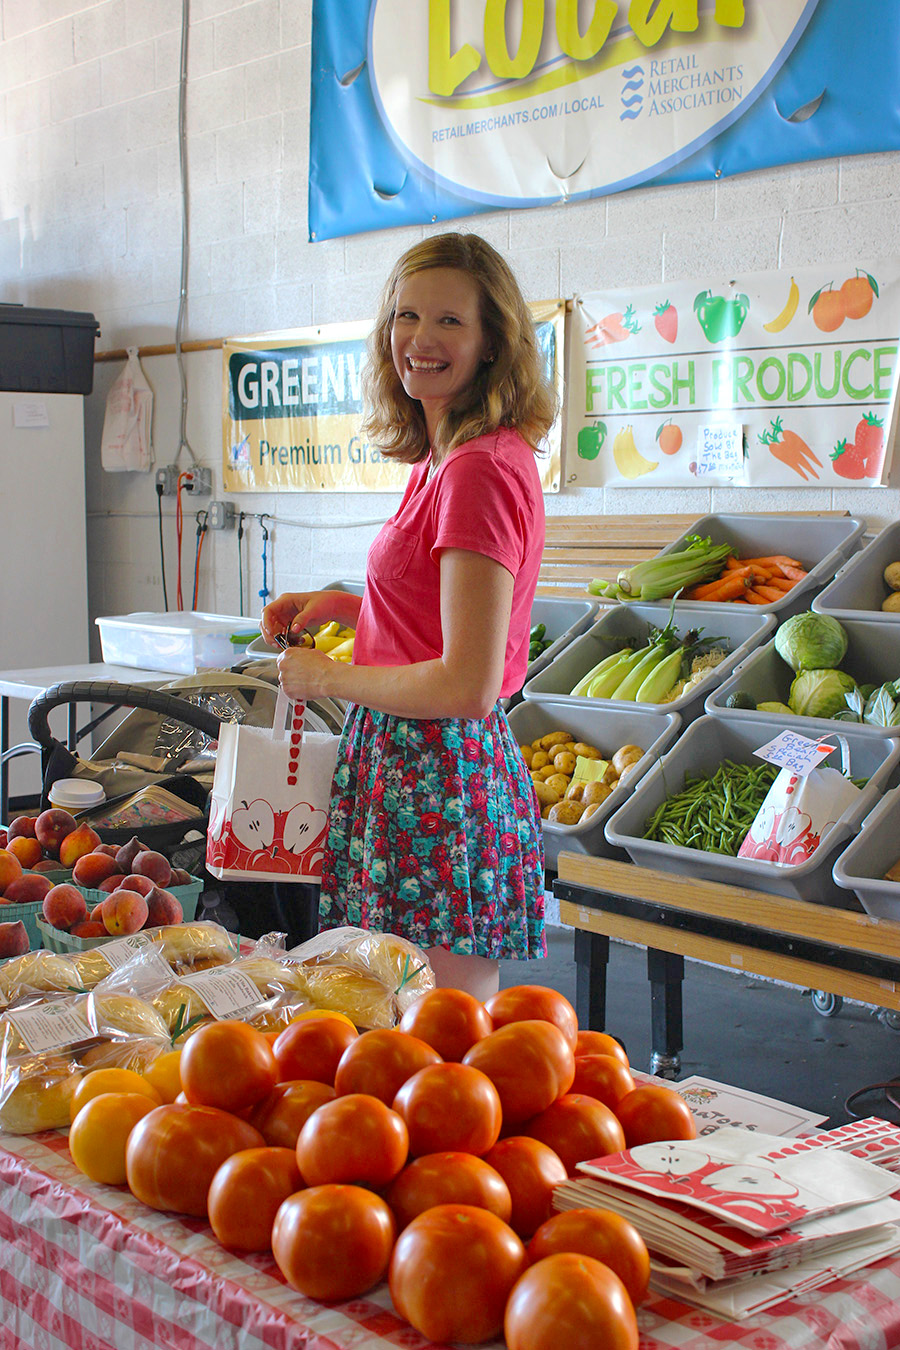 5 Reasons To Shop At Your Local Farmers Market